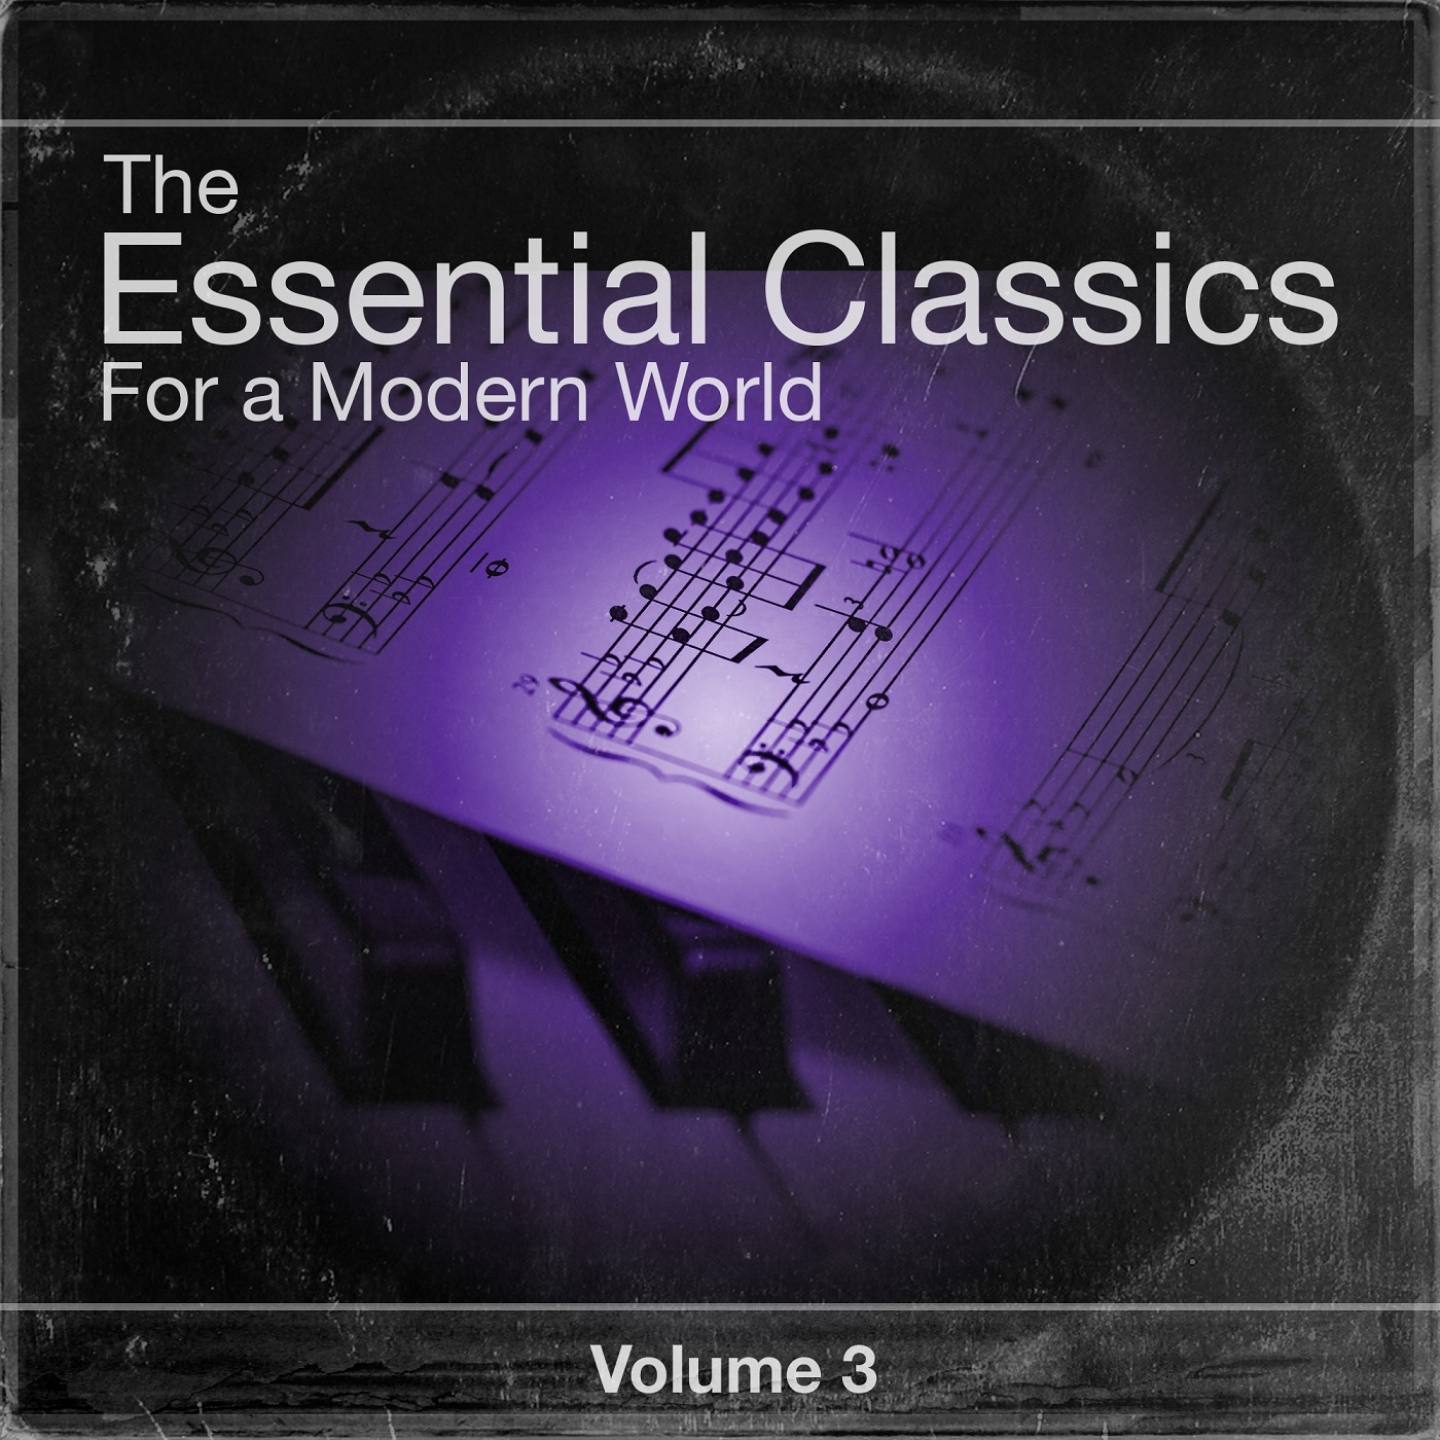 The Essential Classics For a Modern World, Vol. 3